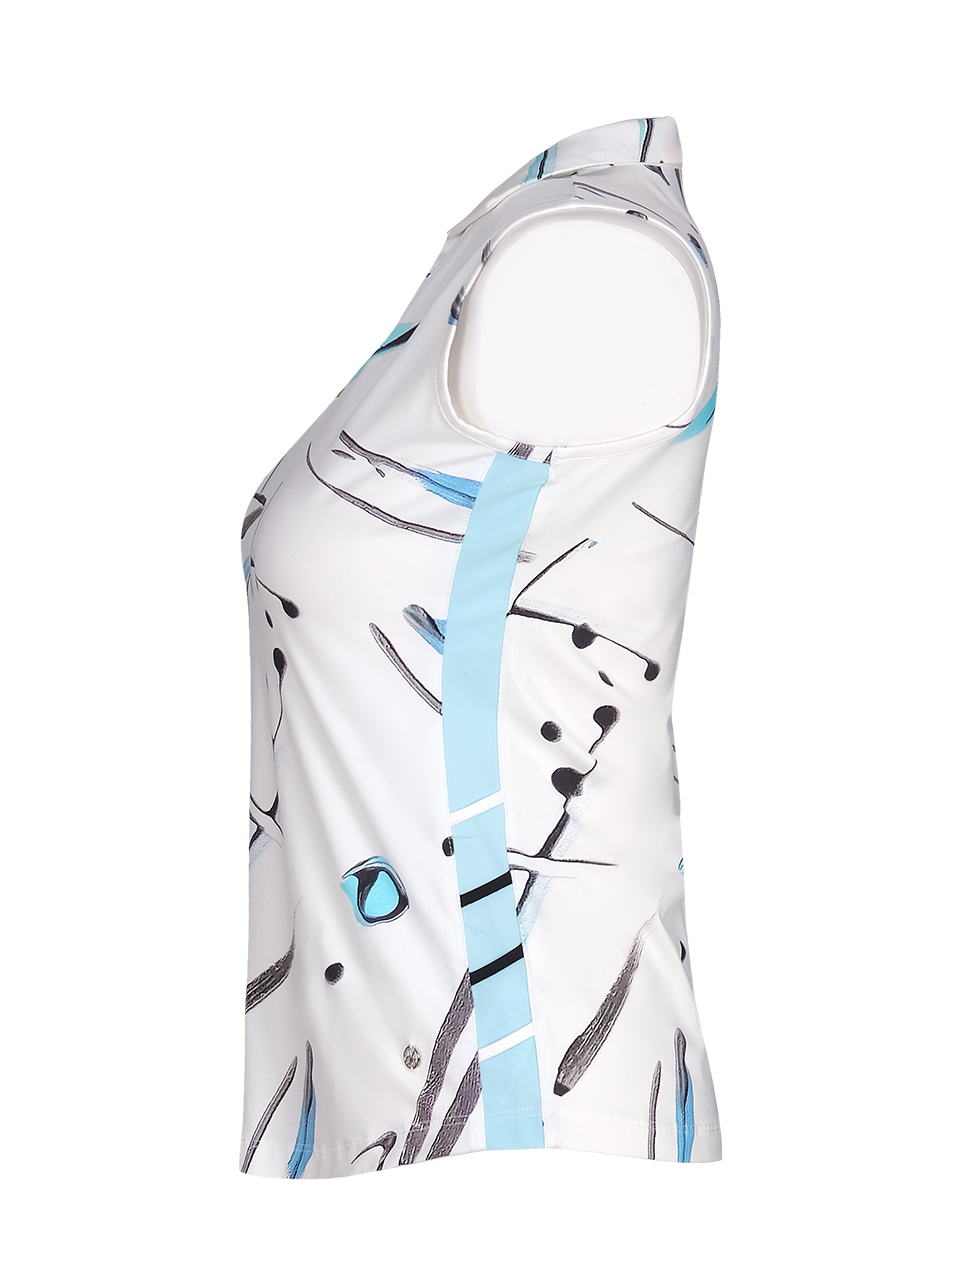 Golf Club Dolcezza: Thetys Abstract Art 4-Way Stretch Comfort Top (Ships Immed, 1 Left at a Special price!)